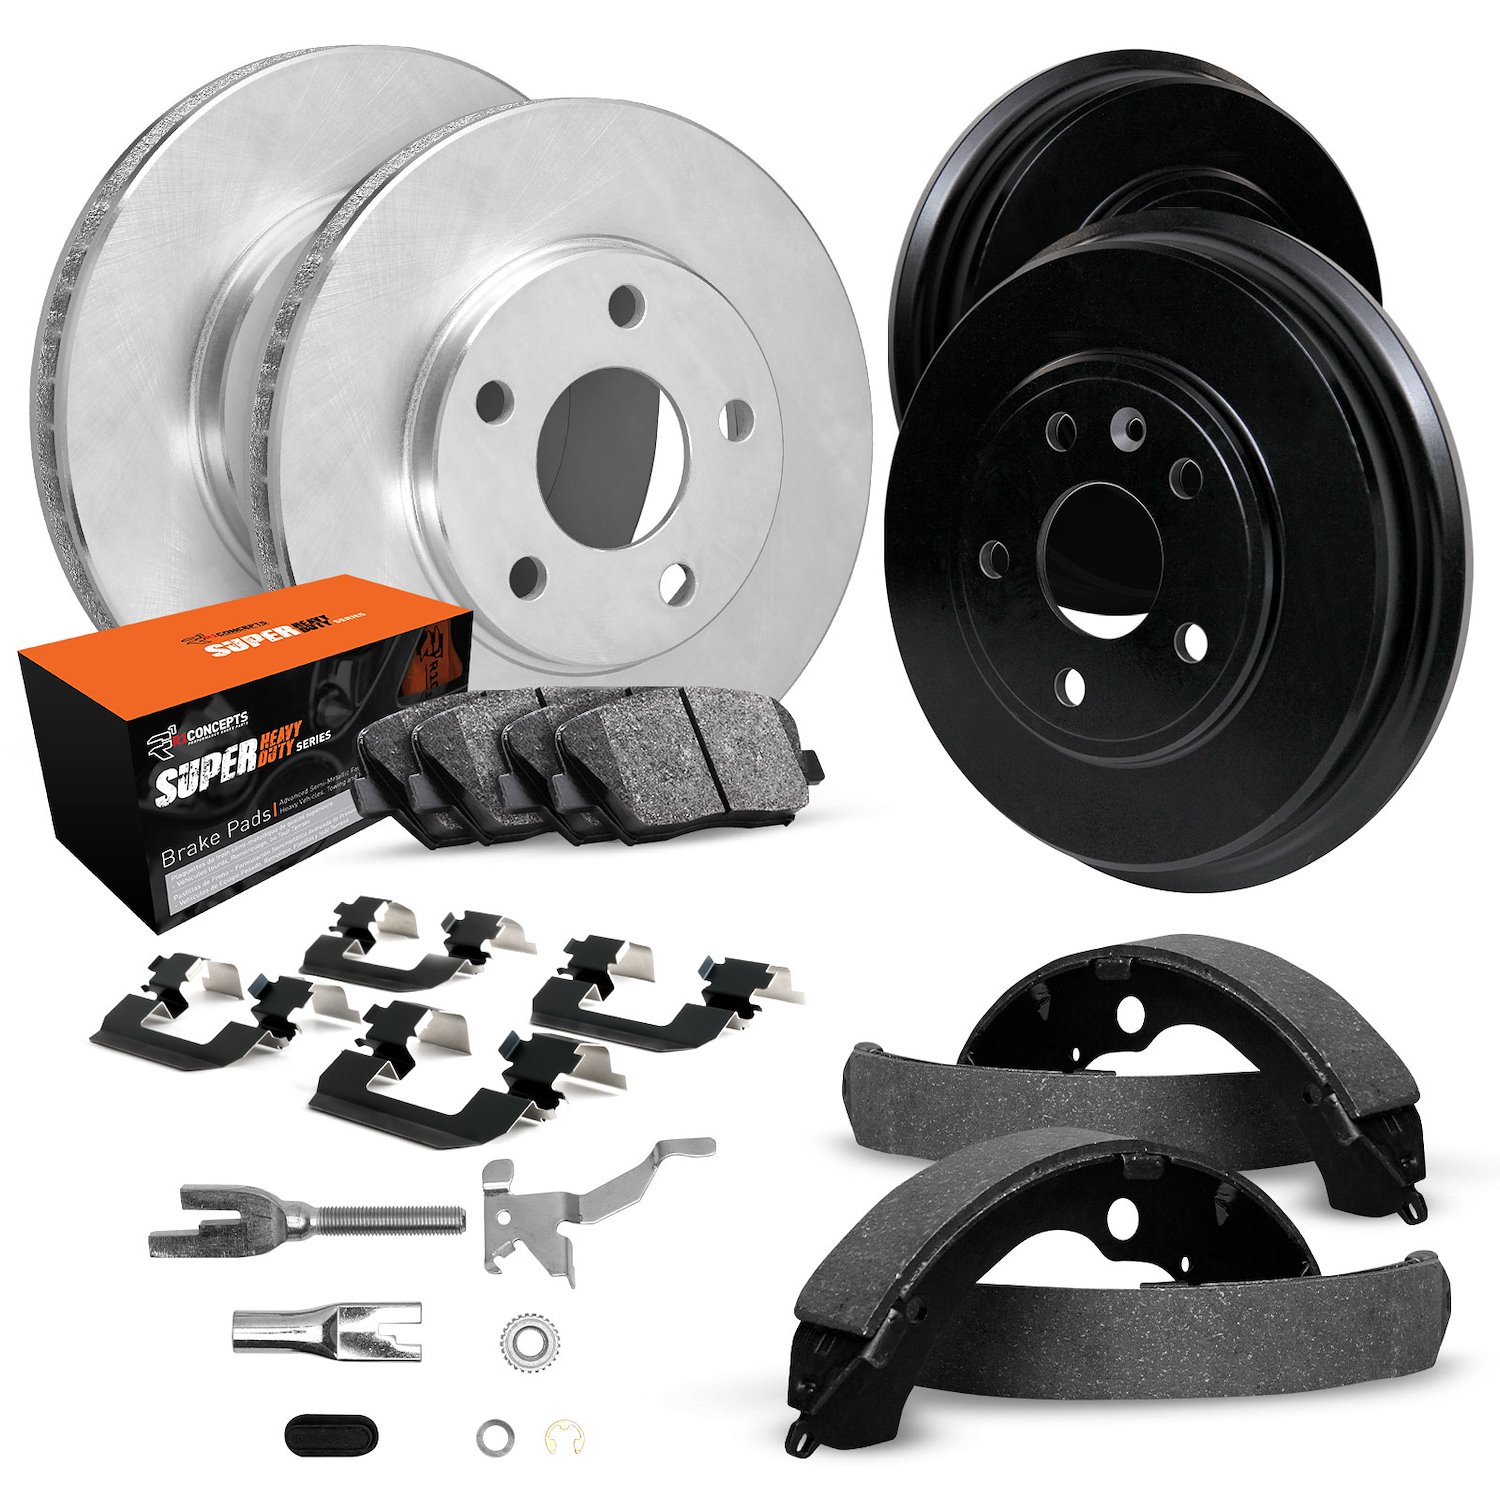 E-Line Blank Brake Rotor & Drum Set w/Super-Duty Pads, Shoes, Hardware, & Adjusters, 1994-2002 GM, Position: Front & Rear